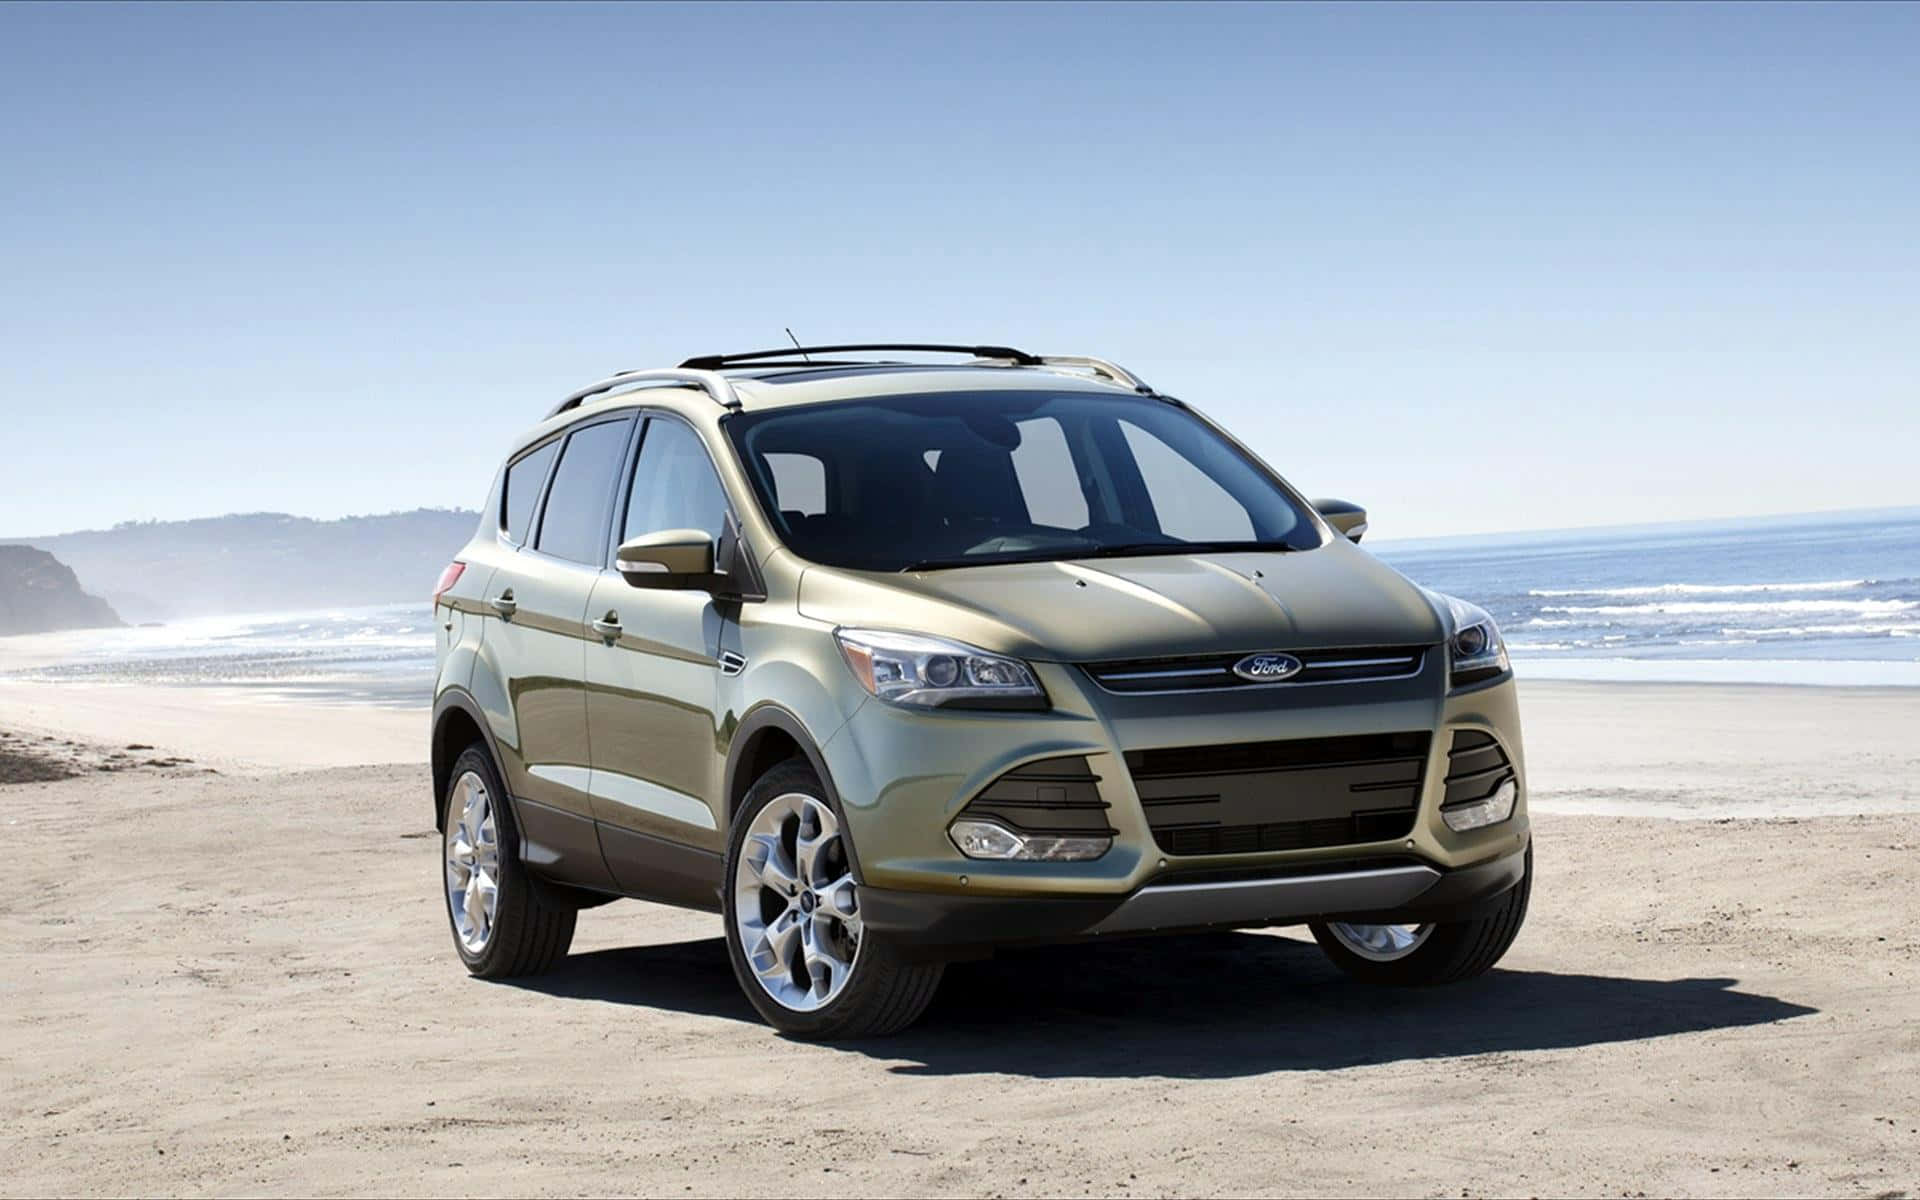 Stunning Ford Escape on the Road Wallpaper